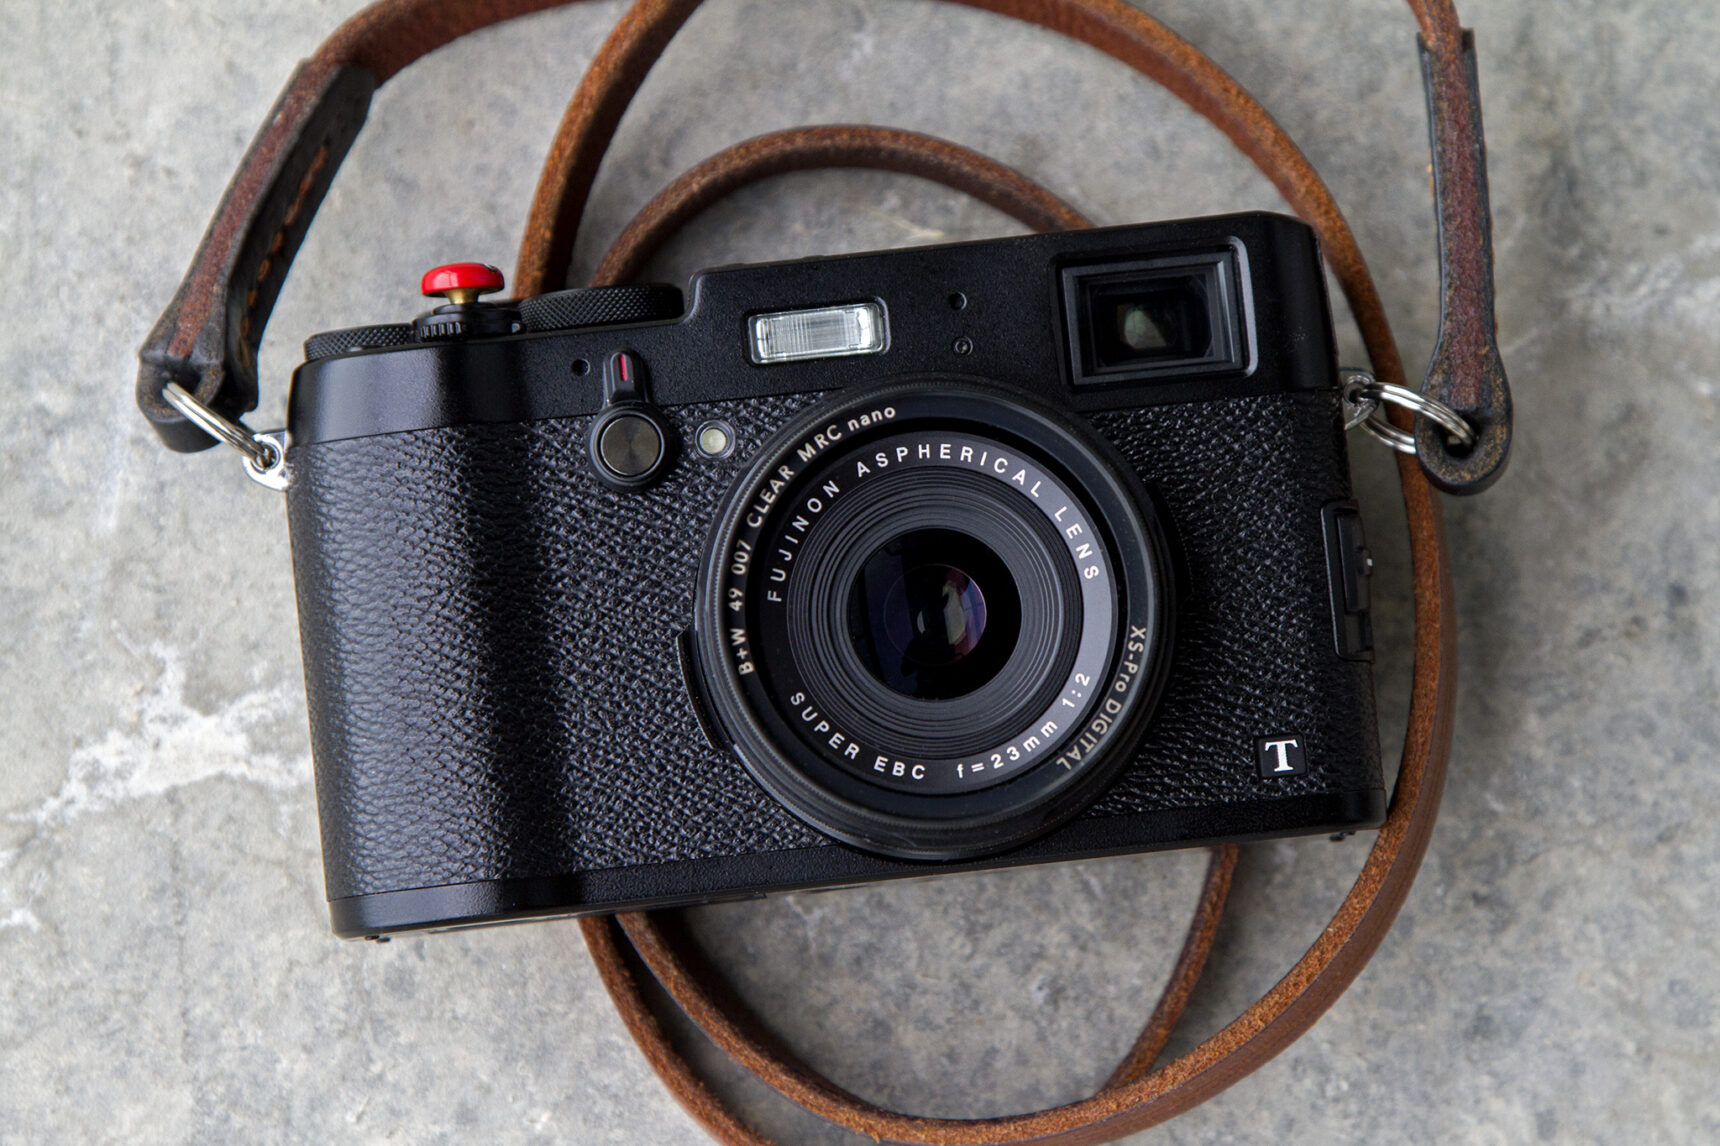 Leica-Like: The Leather-Clad Fujifilm X100 Special Edition